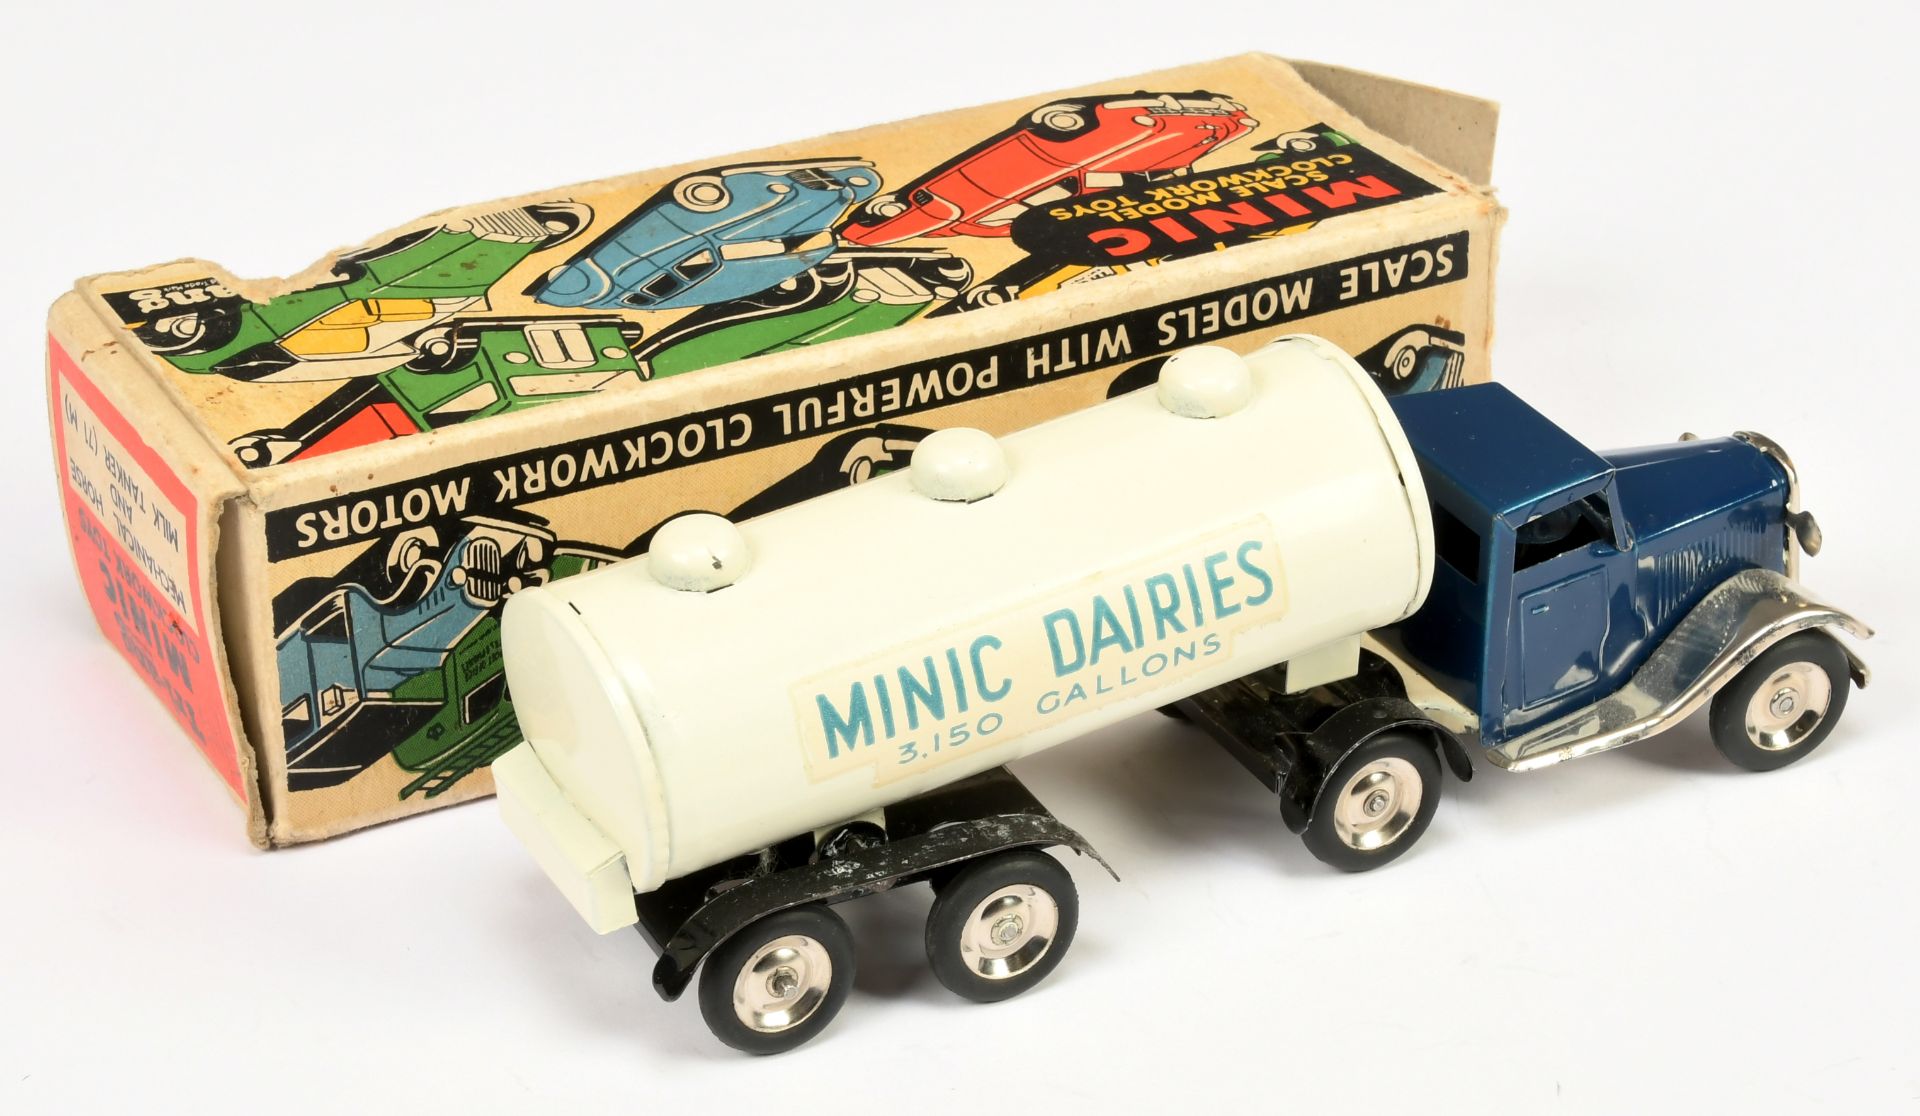 Triang Minic Clockwork 71M "Minic Dairies" Articulated Truck and Tanker Trailer - Blue cab with W... - Image 2 of 2